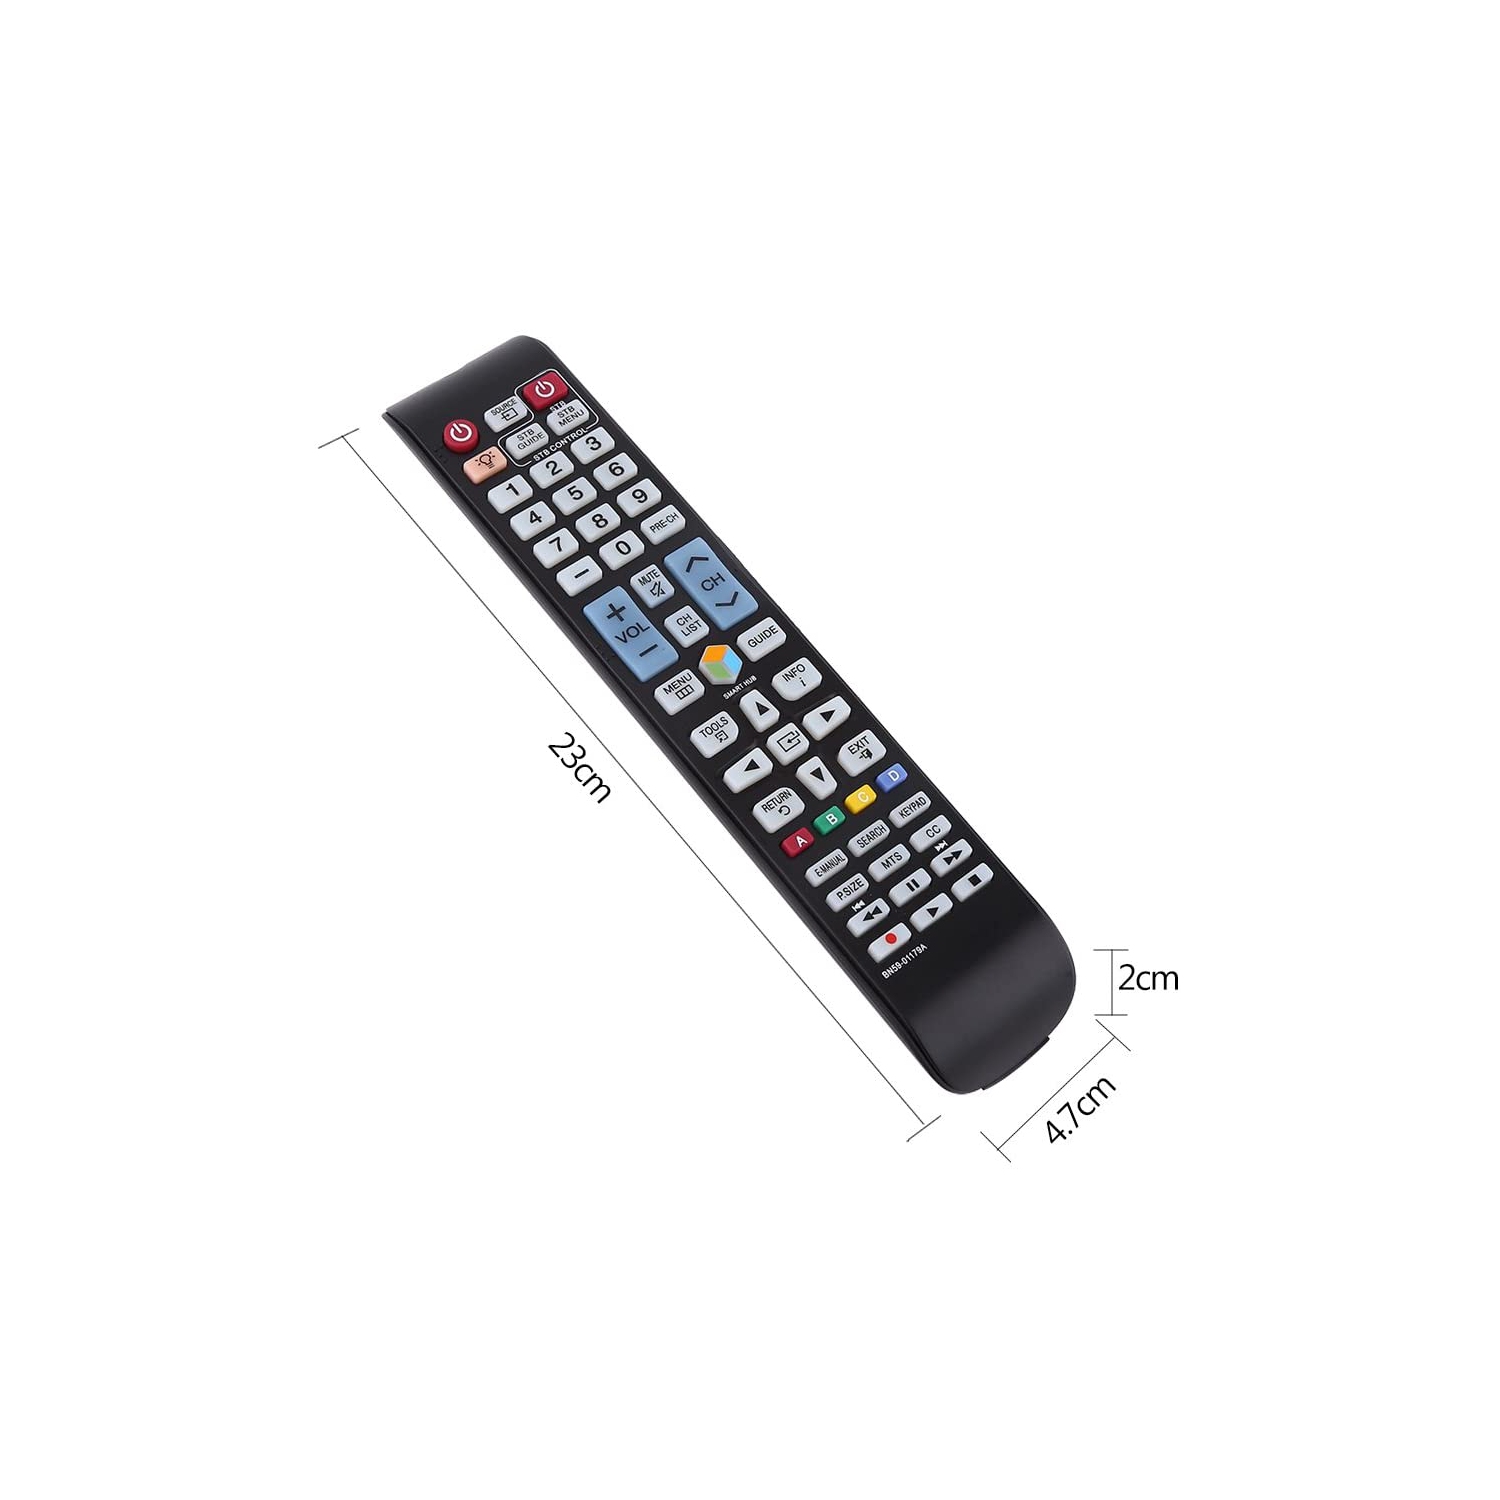 BN59-01179A Remote Control Replacement for Samsung TV, Universal Remote Control Fit for Samsung Brand Smart TV